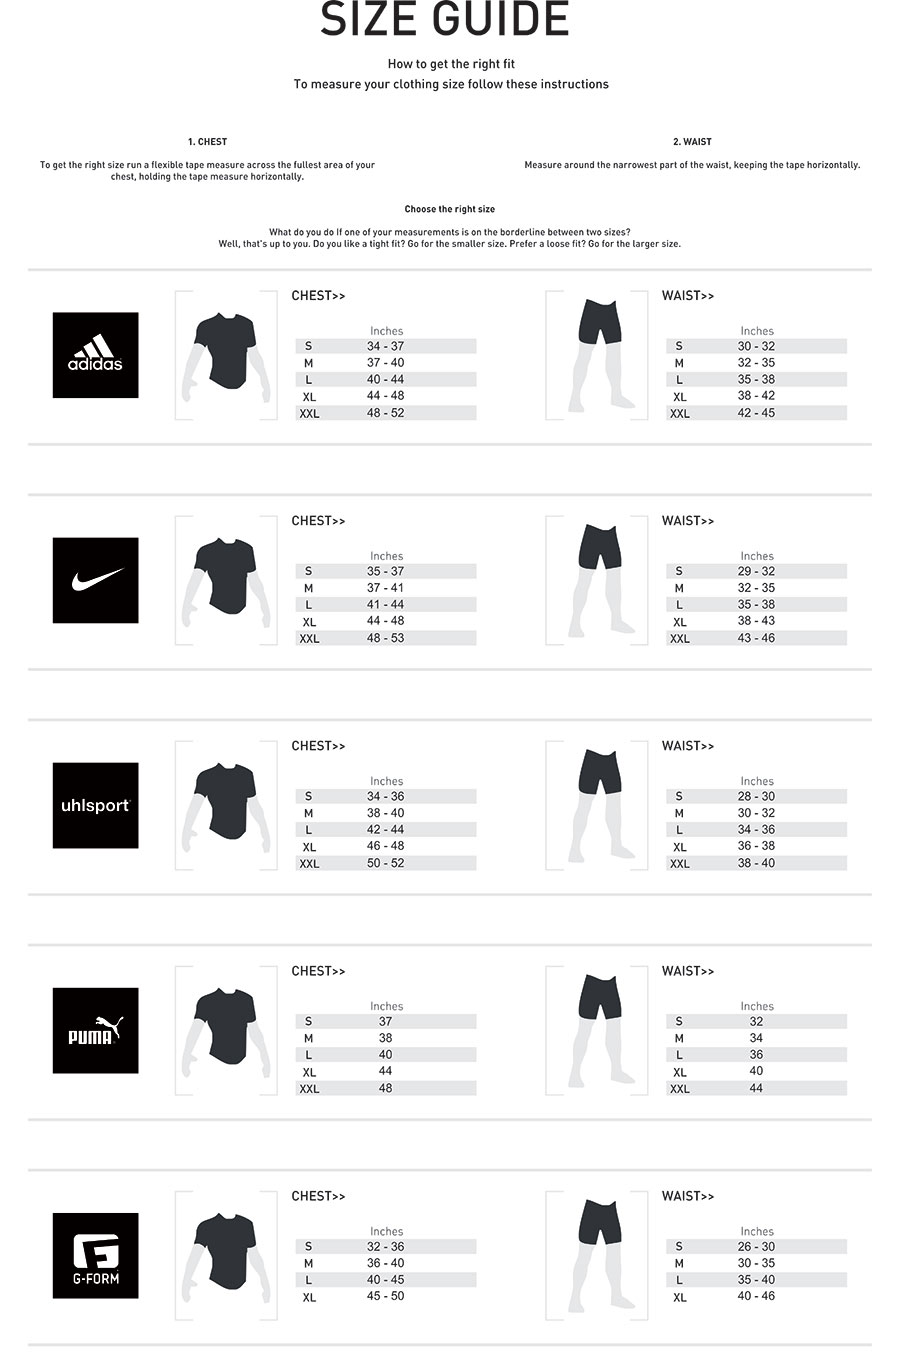 adidas size guide clothing